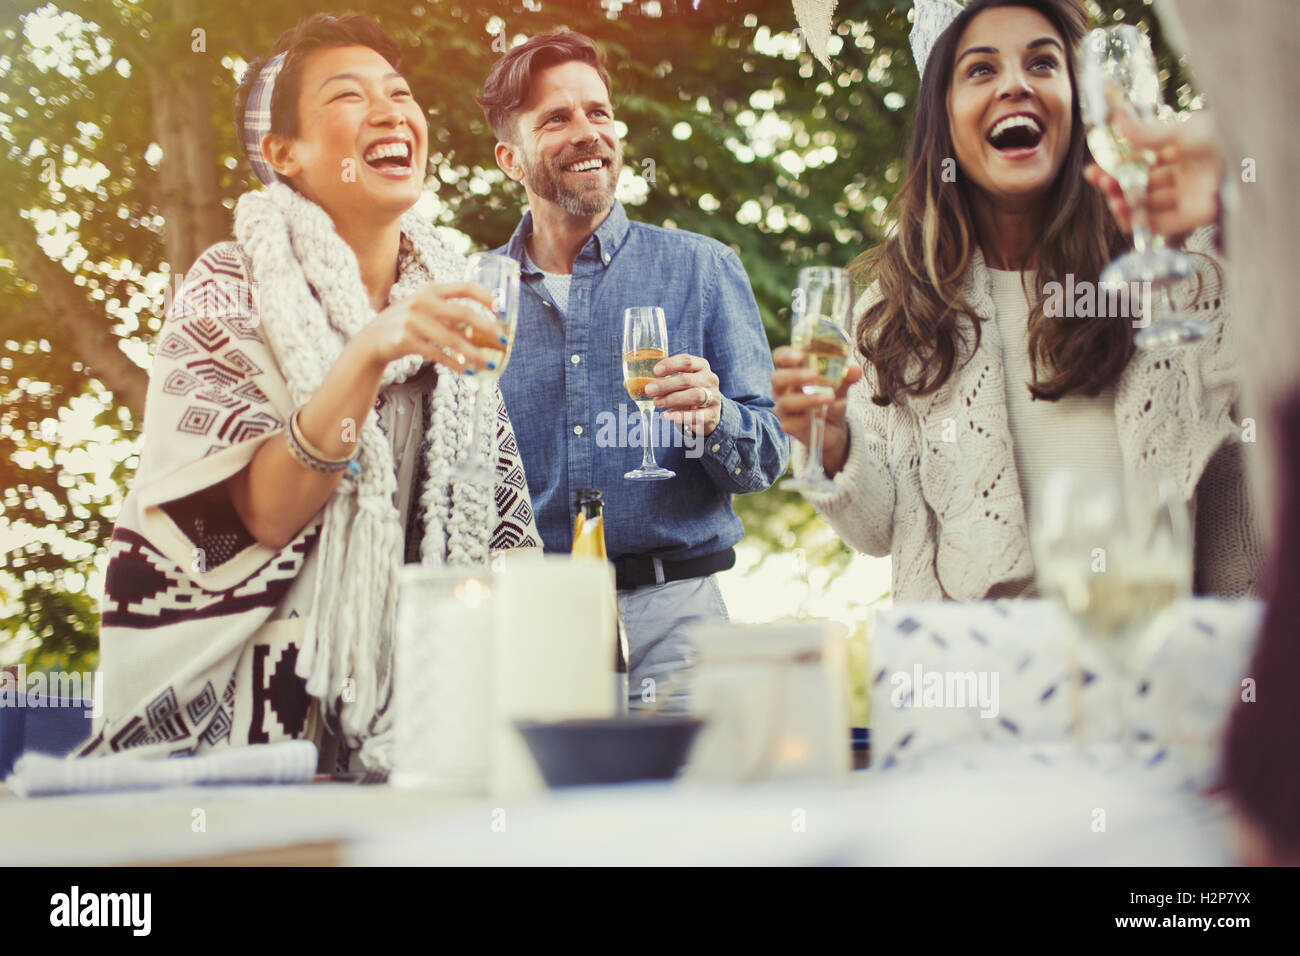 Friends laughing and drinking champagne at birthday party Stock Photo